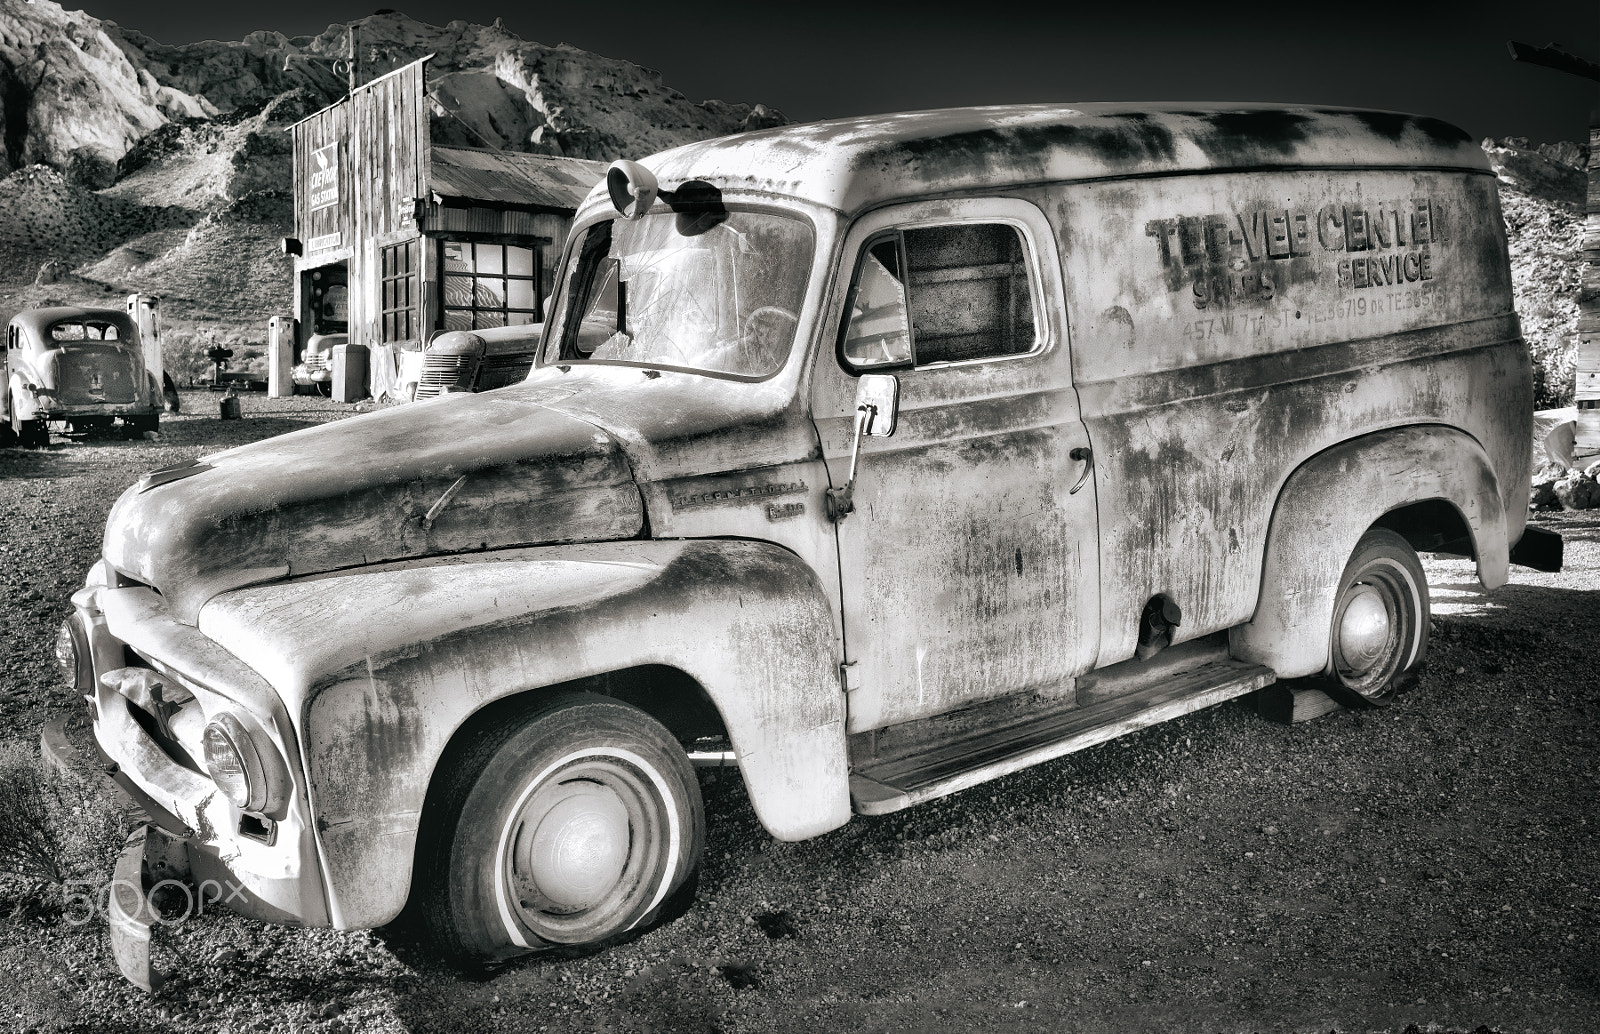 Pentax 645D sample photo. "tee vee center service van, nelson ghost town, nv photography